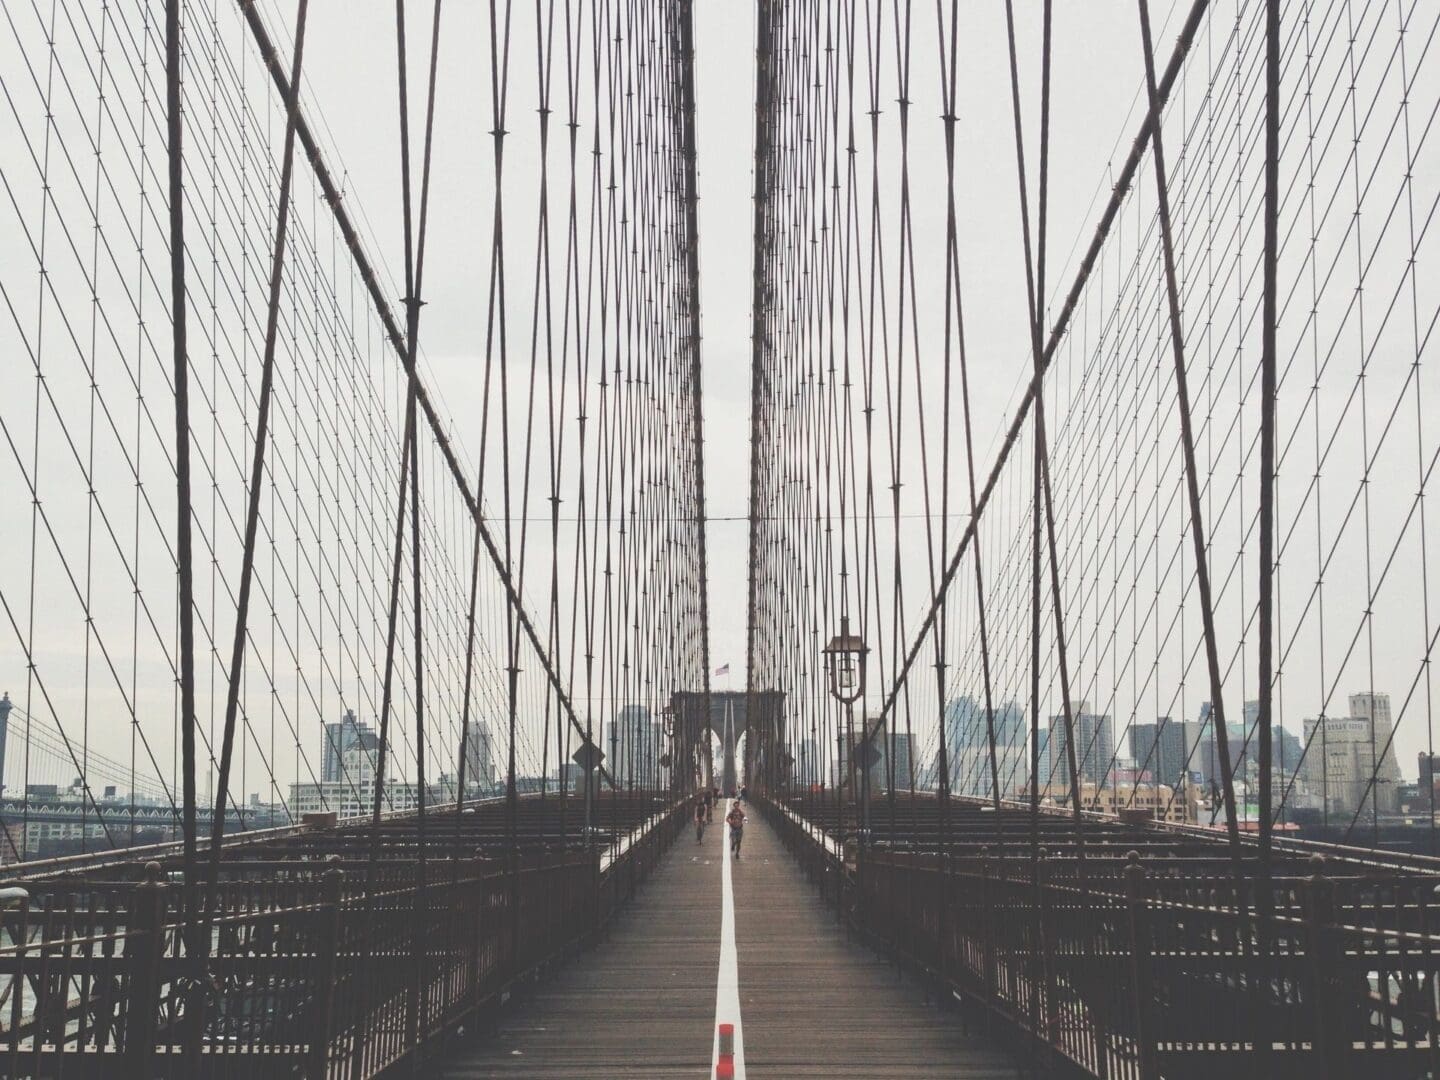 Symmetrical view of a pedestrian pathway on the brooklyn bridge with suspension cables converging in the distance.